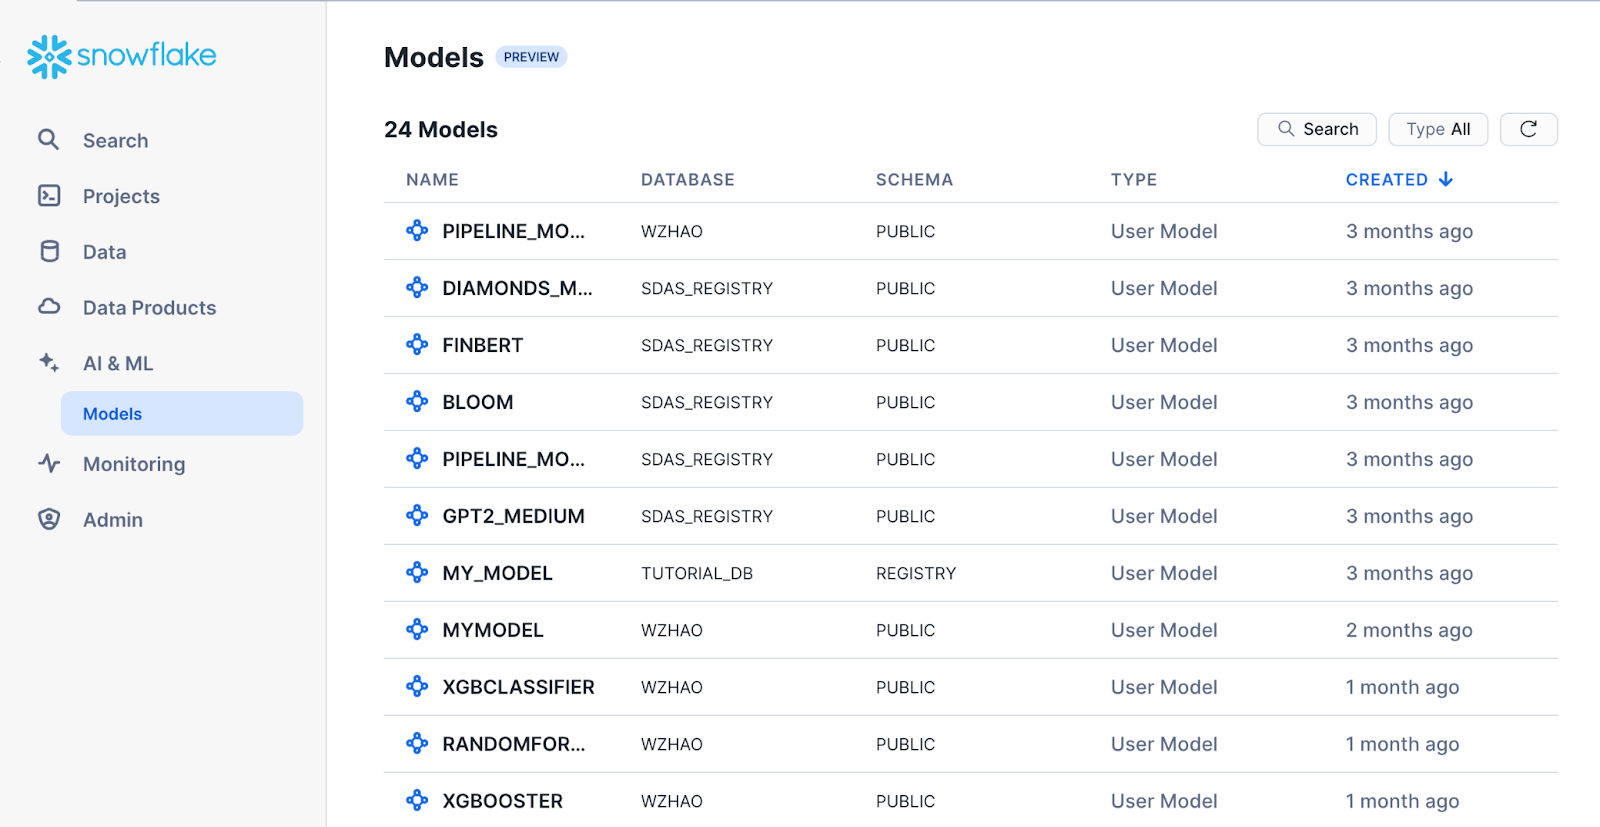 The Models page, displaying a list of the available machine learning models